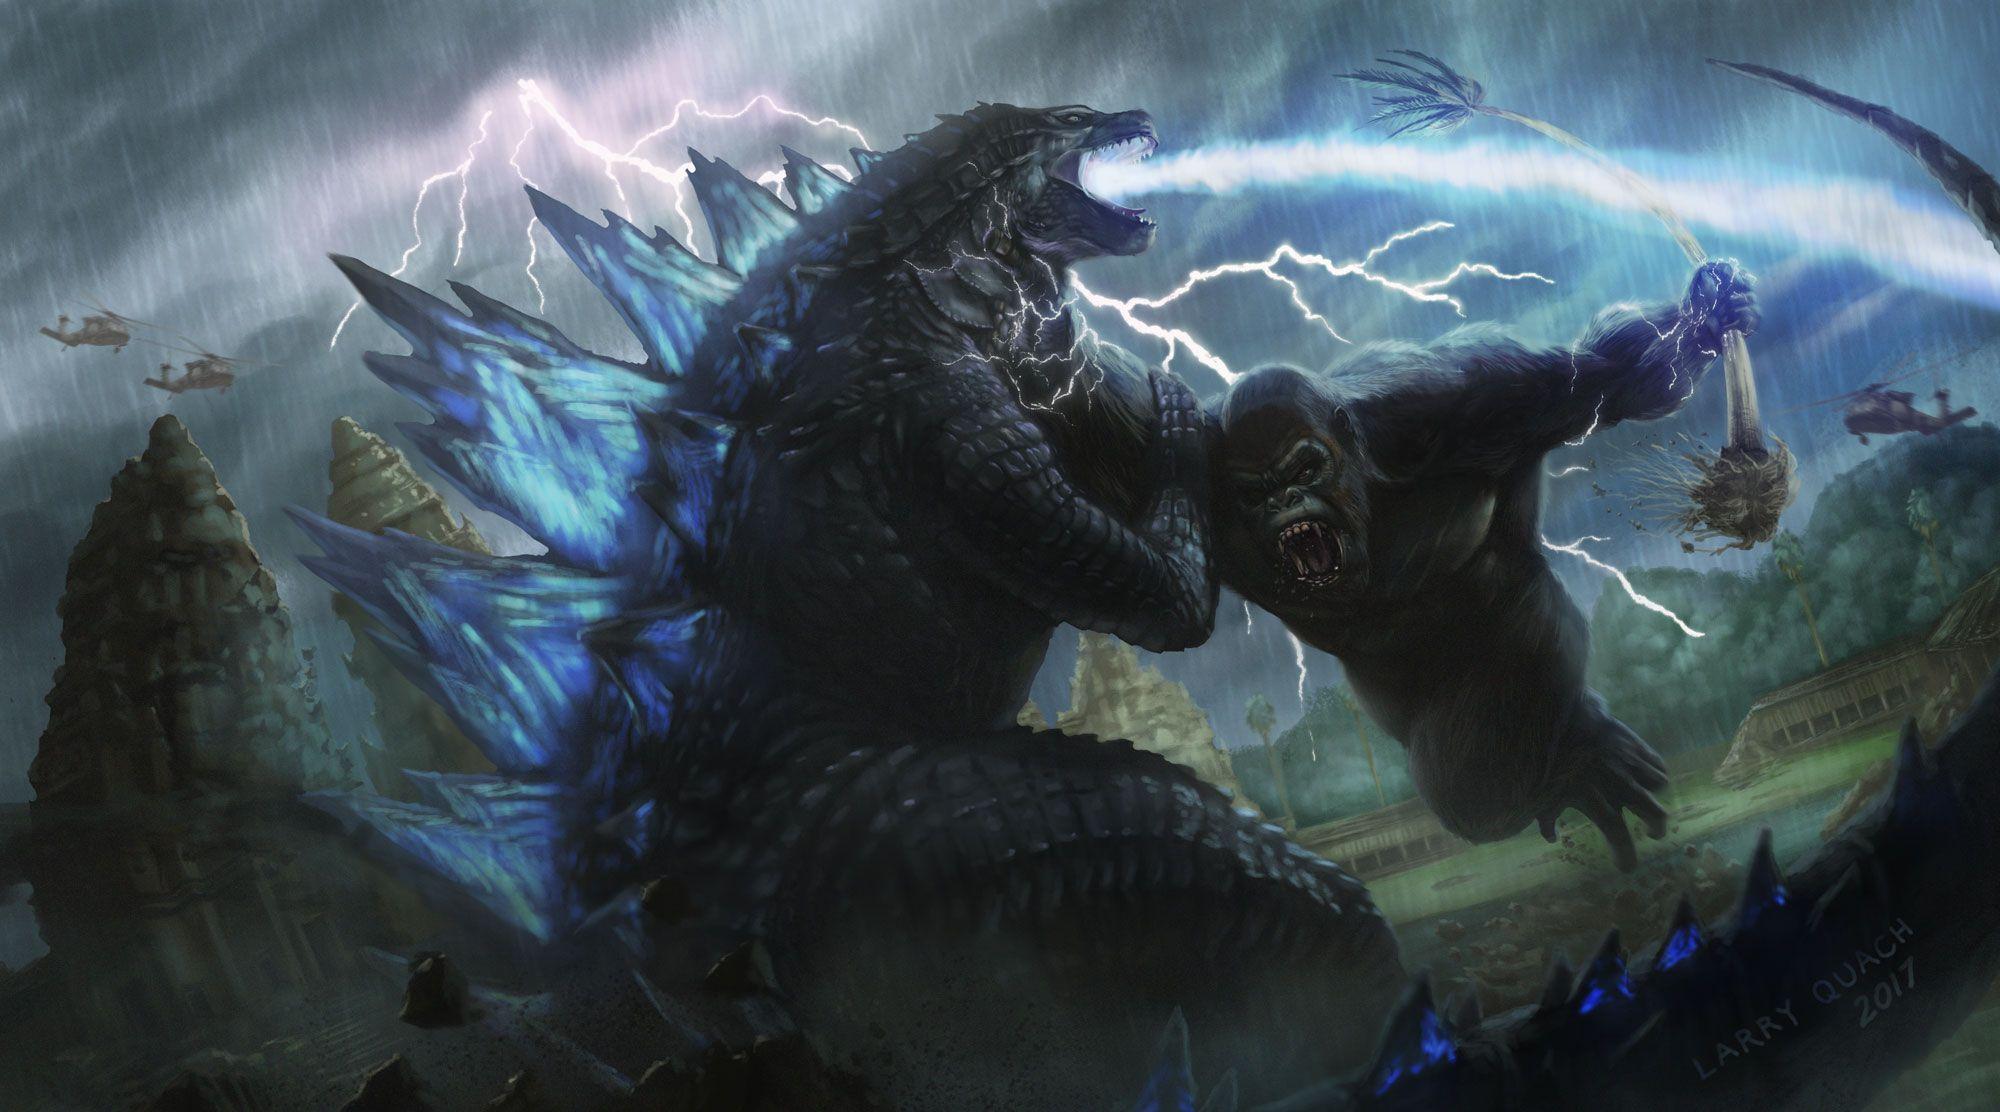 I did an illustration of what Godzilla vs King Kong might look like